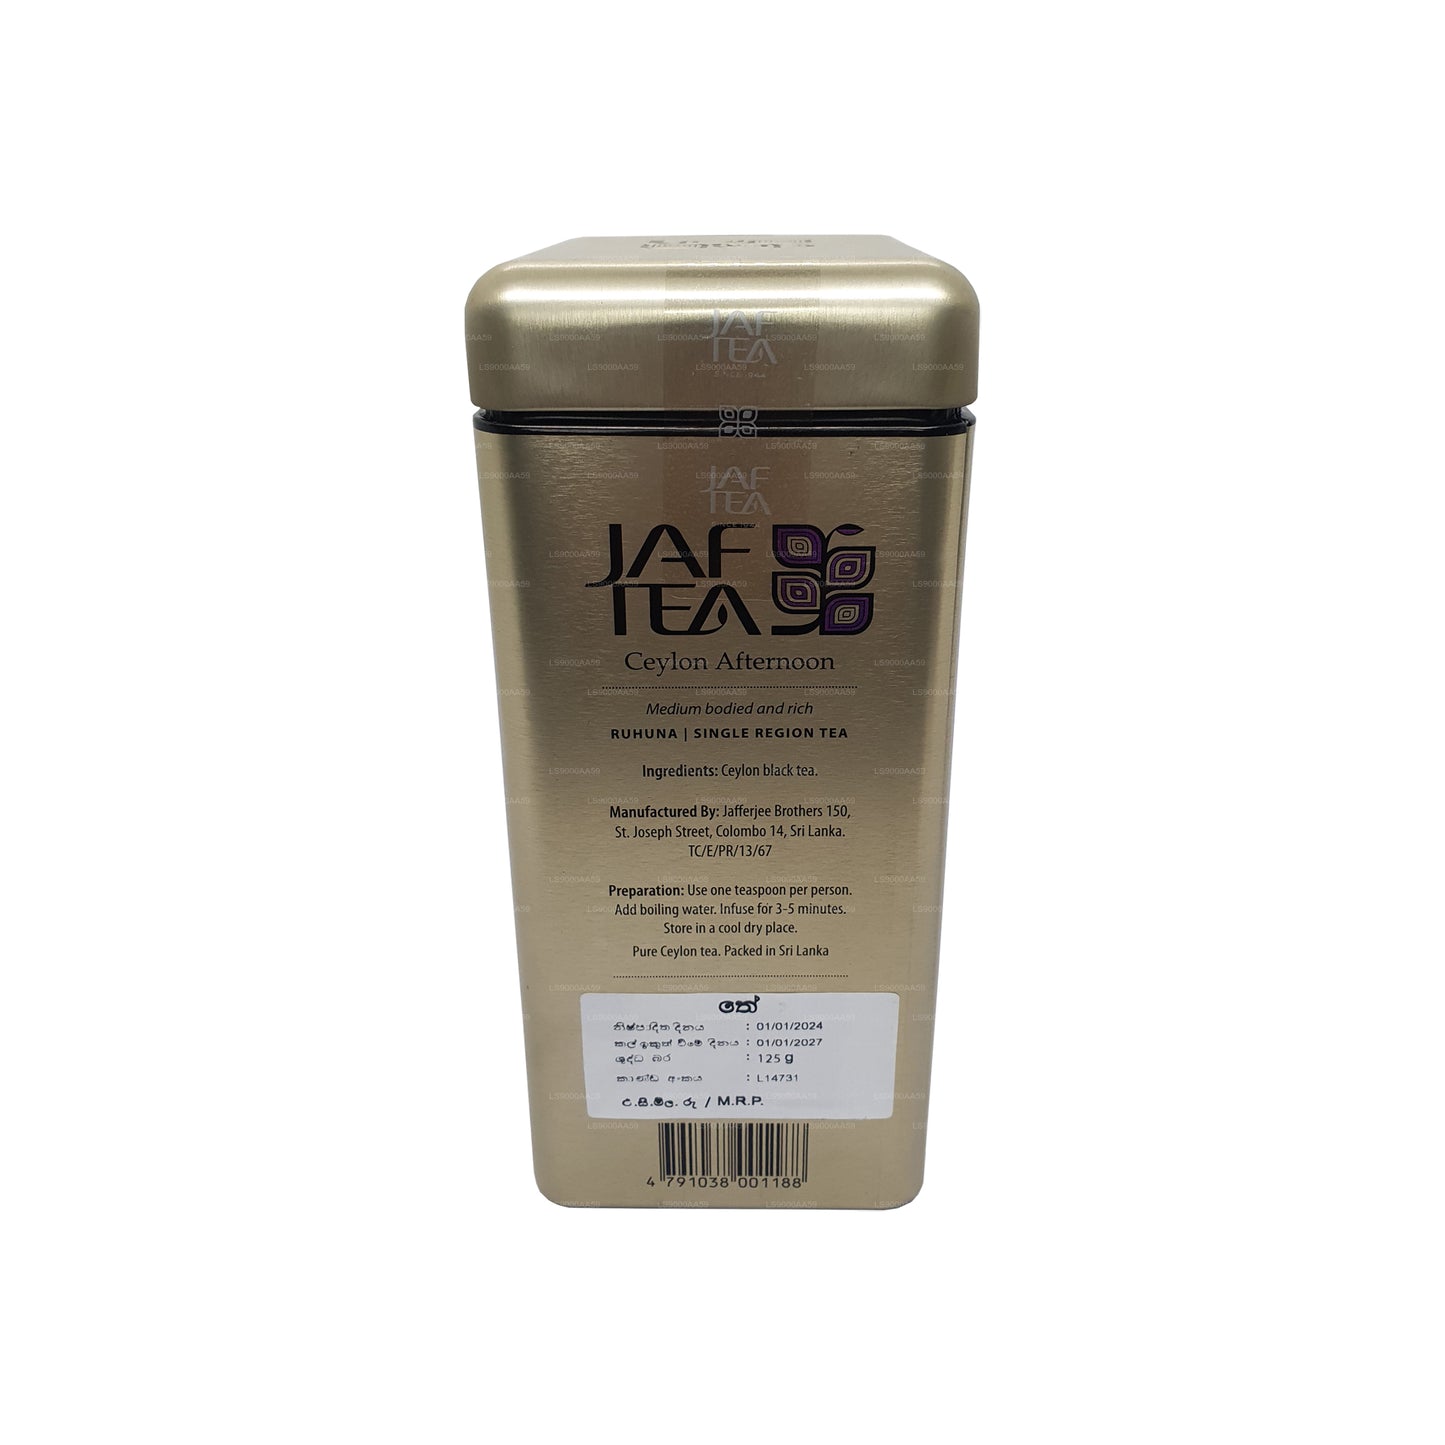 Jaf Tea Classic Gold Collection Ceylon Afternoon Caddy (125 g)